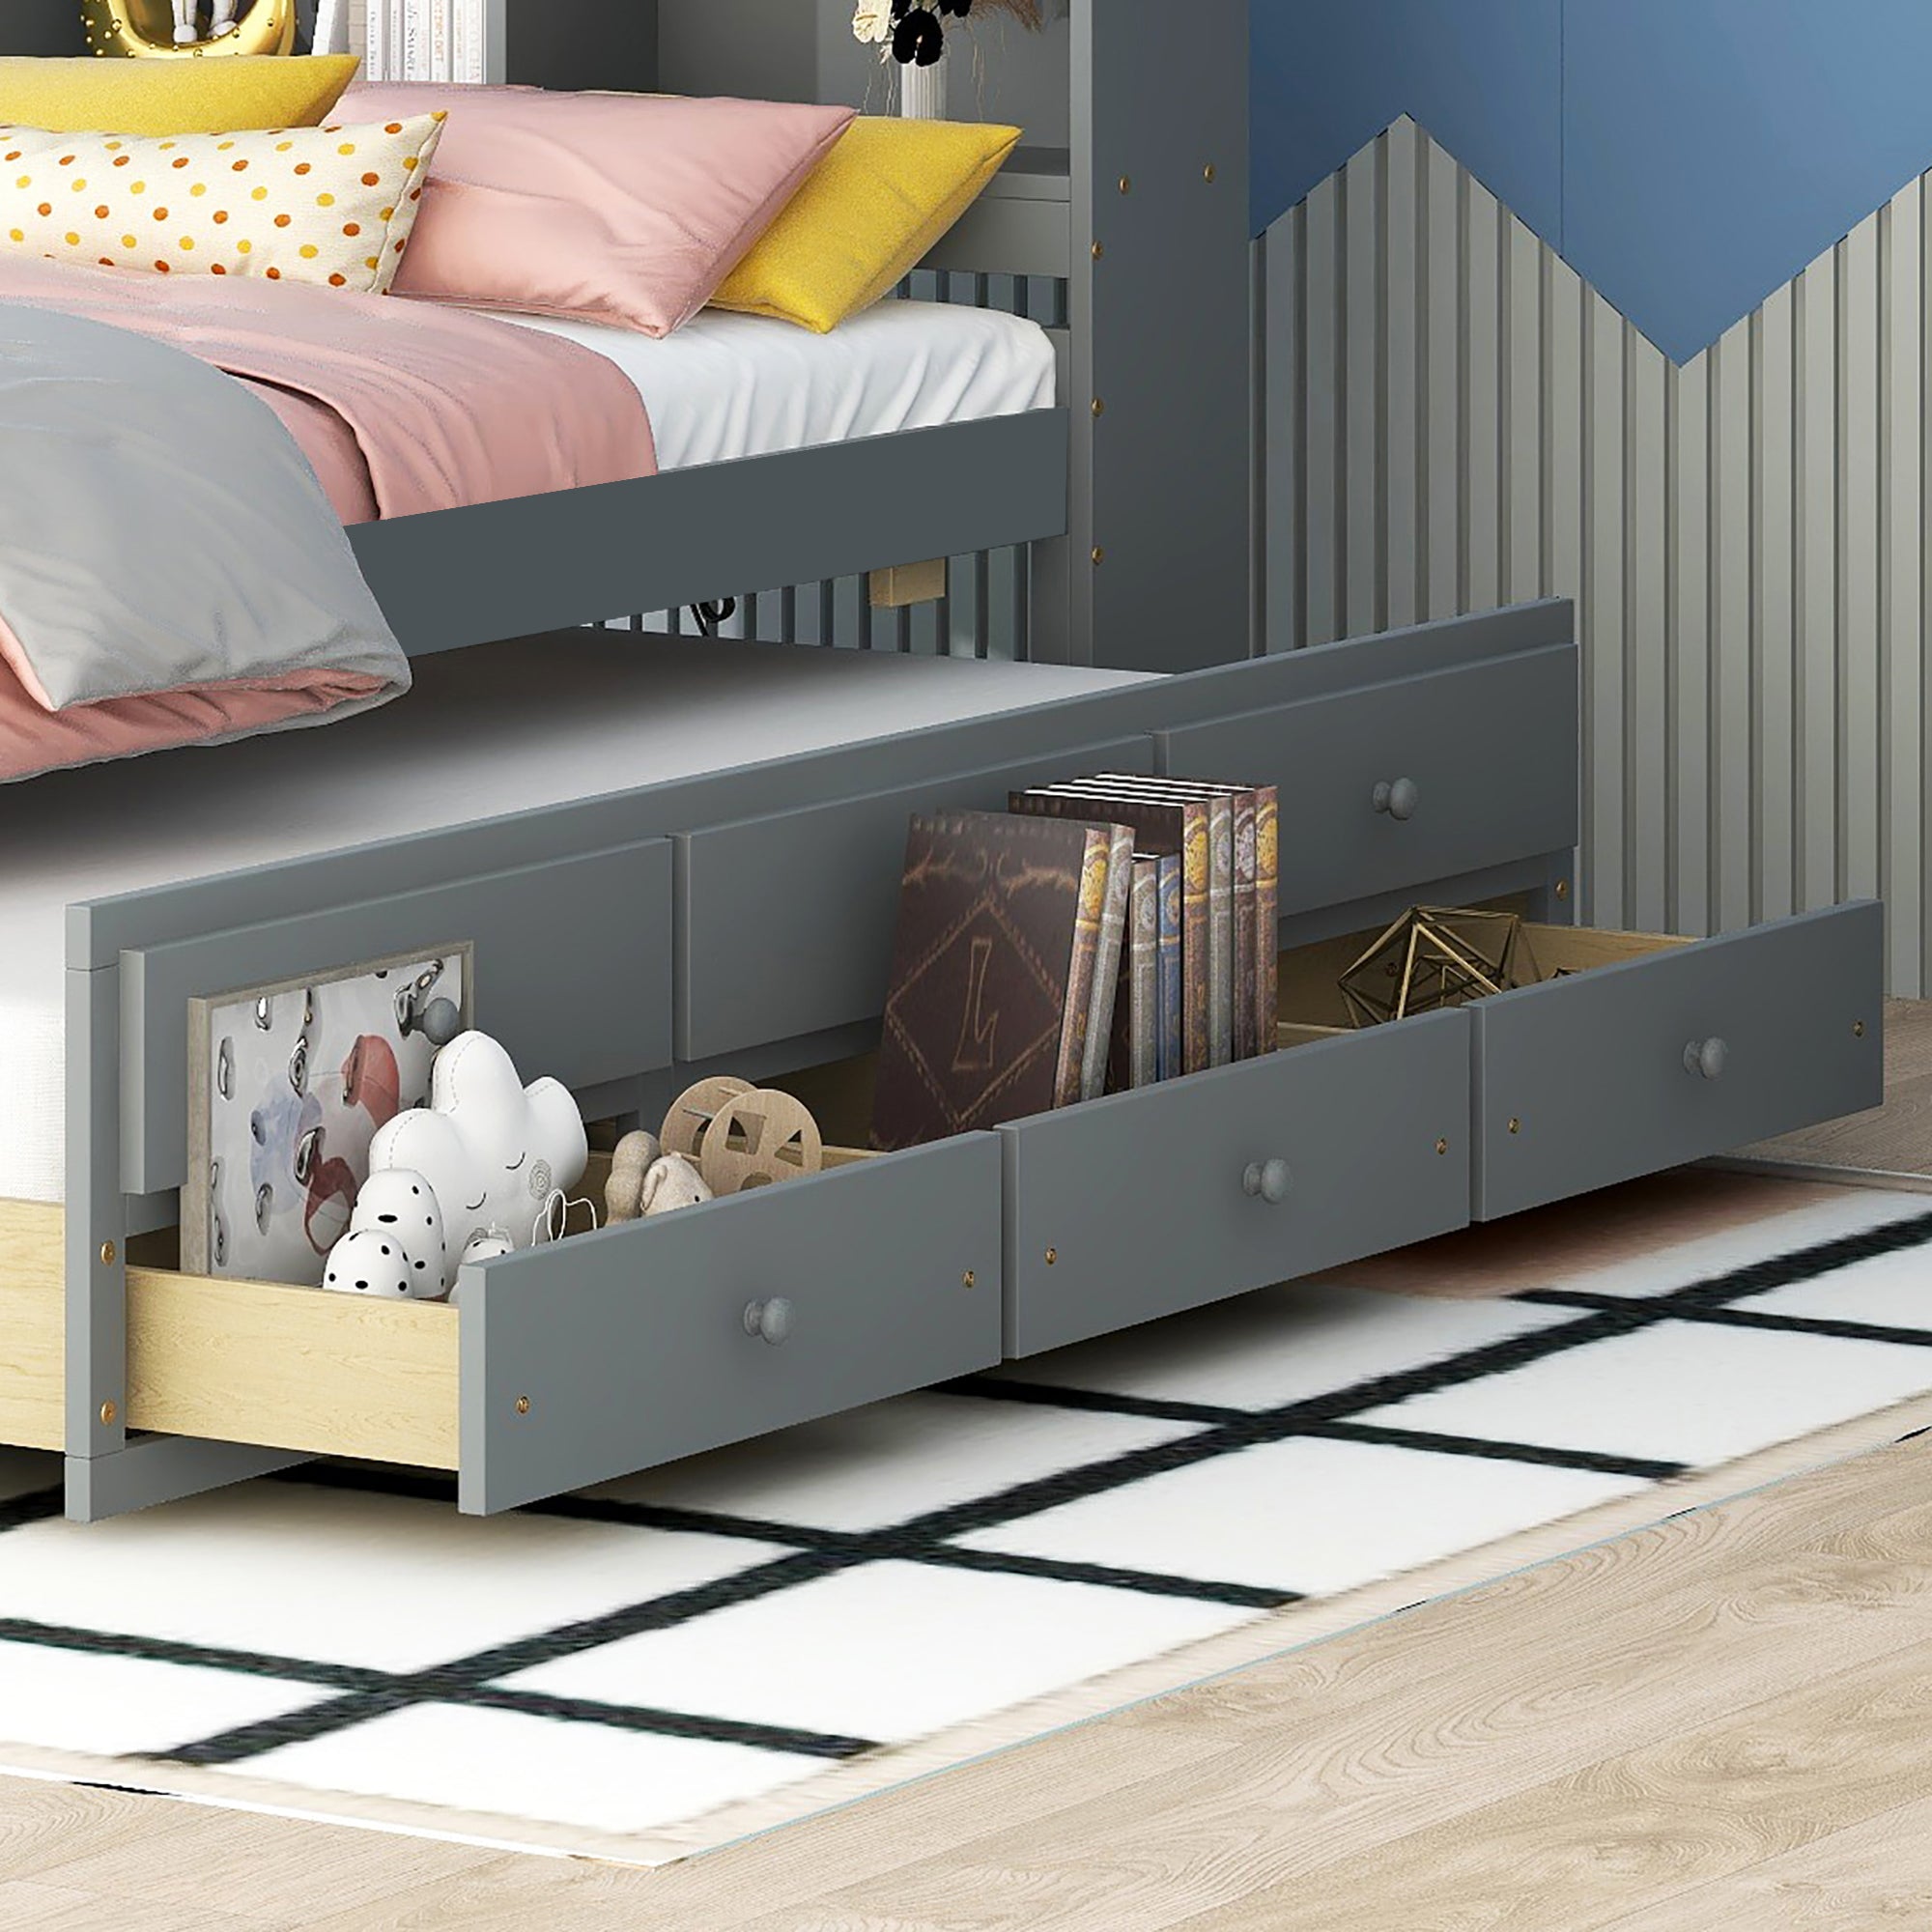 Bellemave Twin Size PlatformBed with Bookcase Headboard, Trundle and Storage Drawers